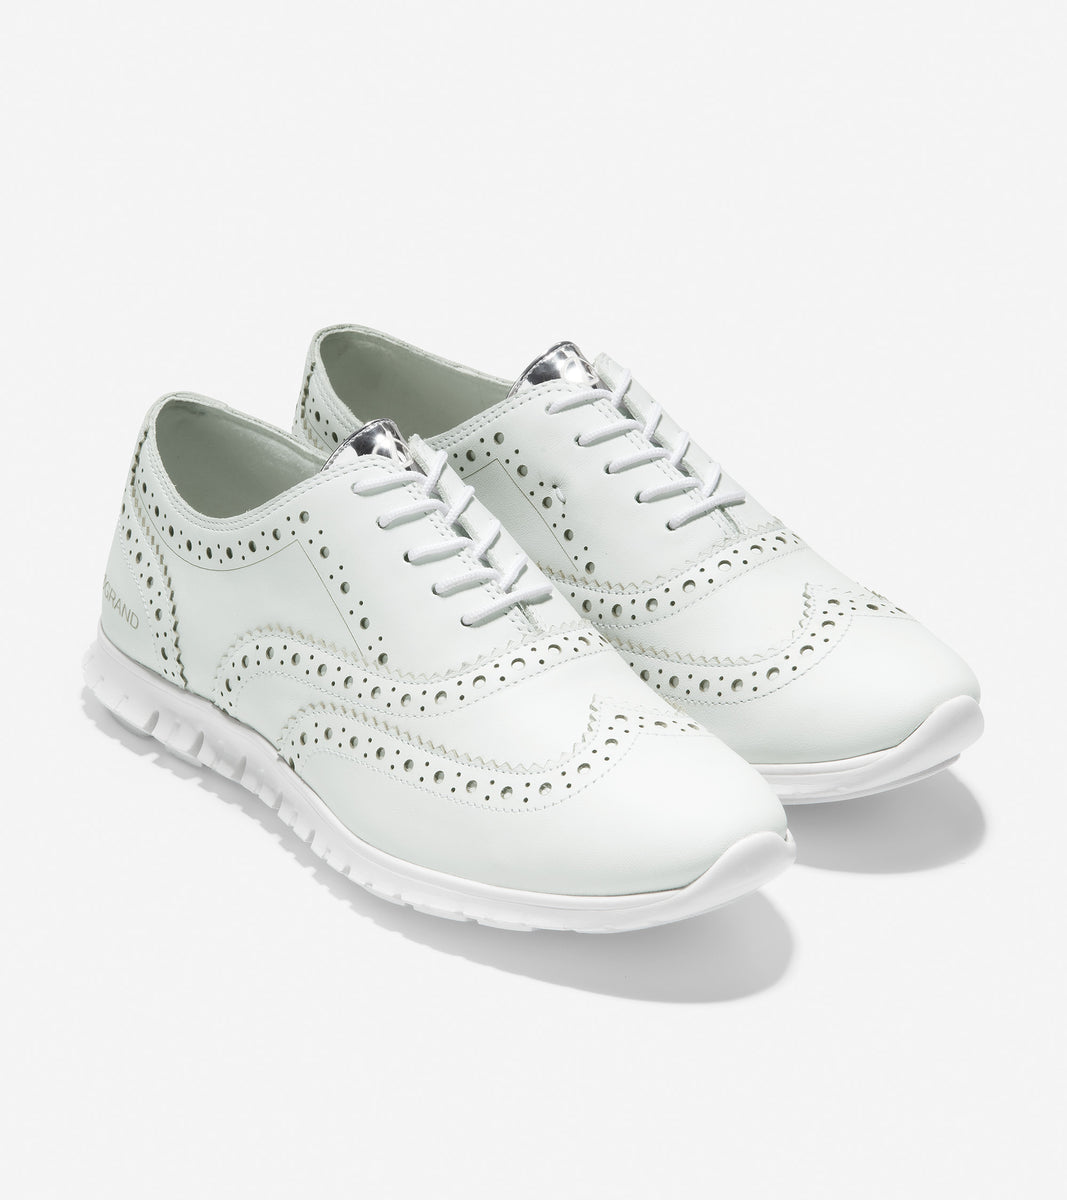 ColeHaan-ZERØGRAND Wingtip Oxford-w20385-Optic White Leather-Argento Leather